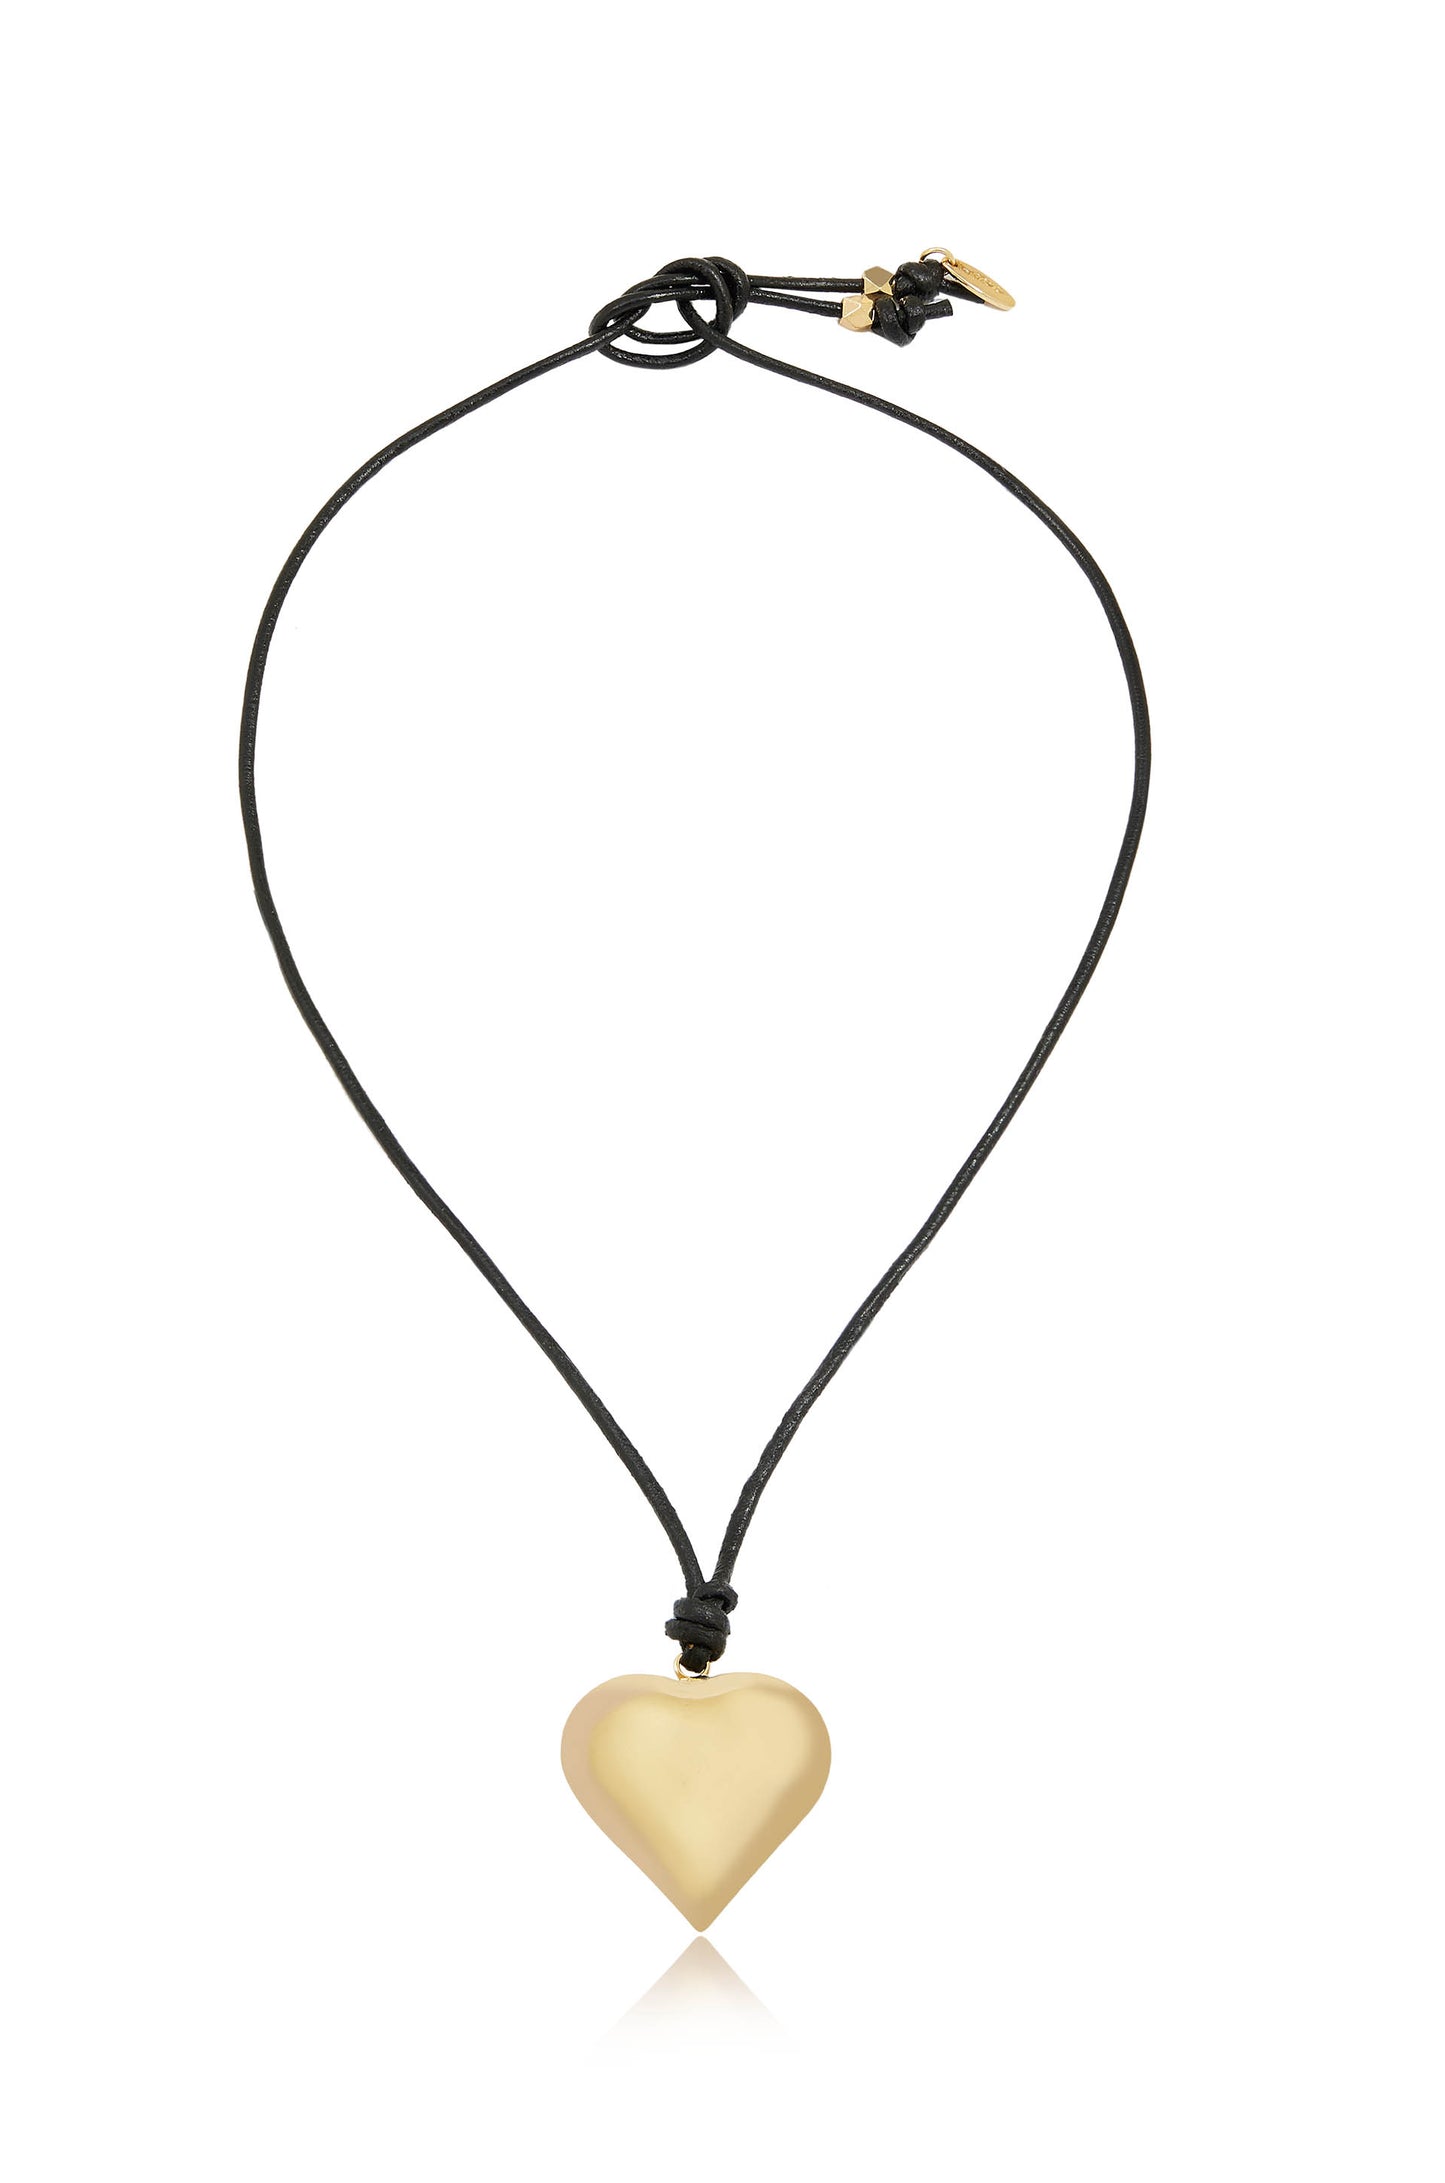 18k Gold Plated Heart Pendant Adjustable Cord Necklace